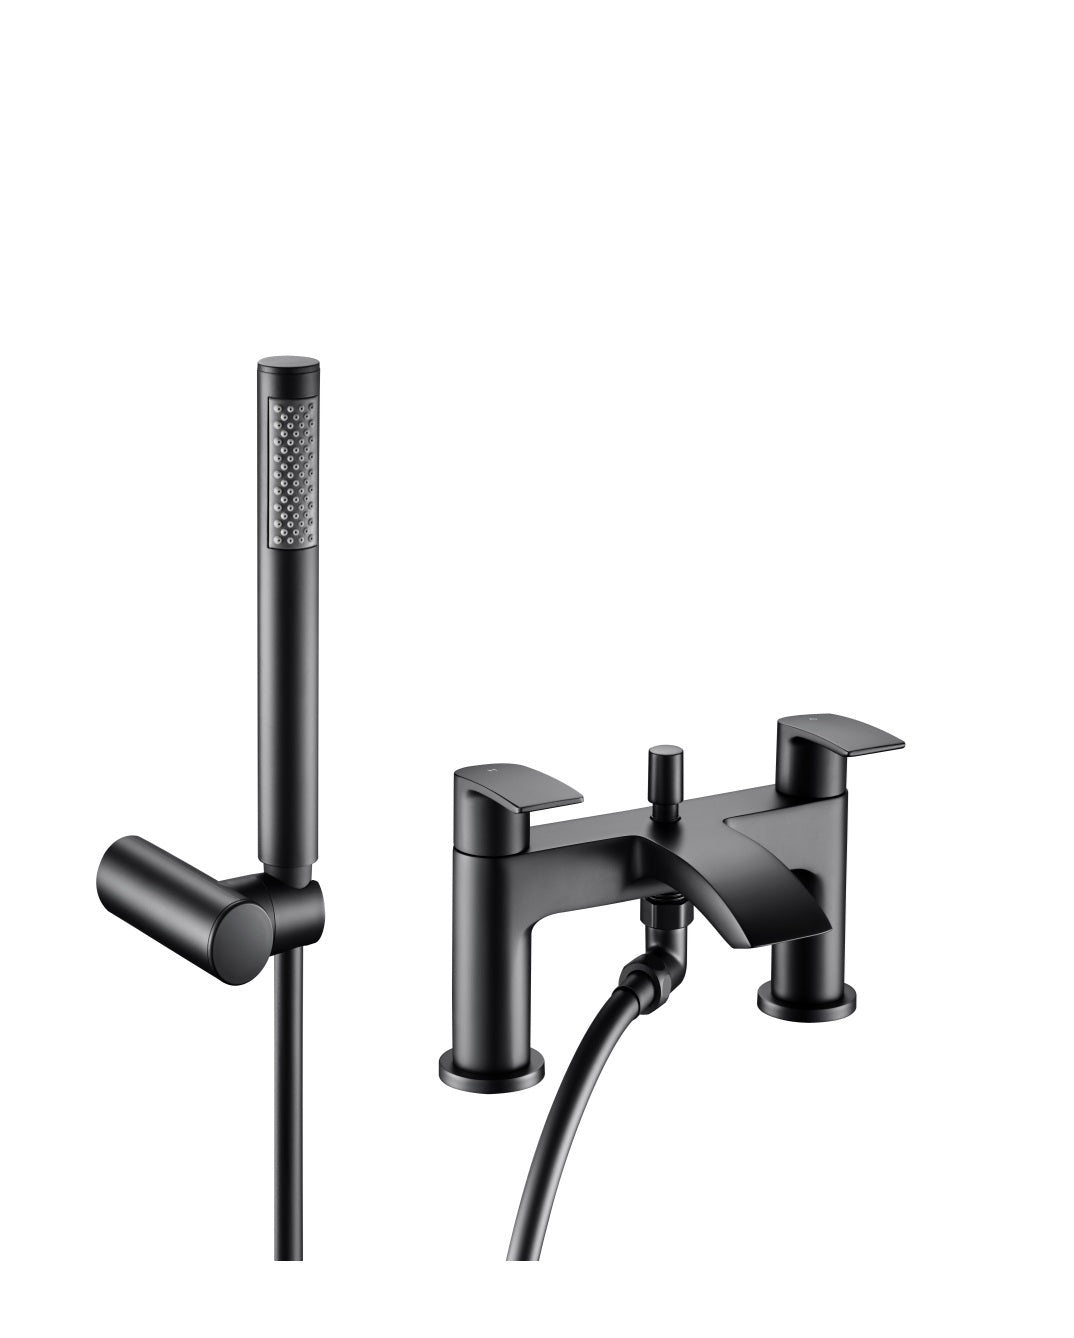 Stylish Carter Bath Shower Mixer in Matte Black finish, featuring a modern design with dual handles and a sleek spout, perfect for contemporary bathrooms. Ideal for enhancing your bathroom décor and providing a luxurious shower experience.